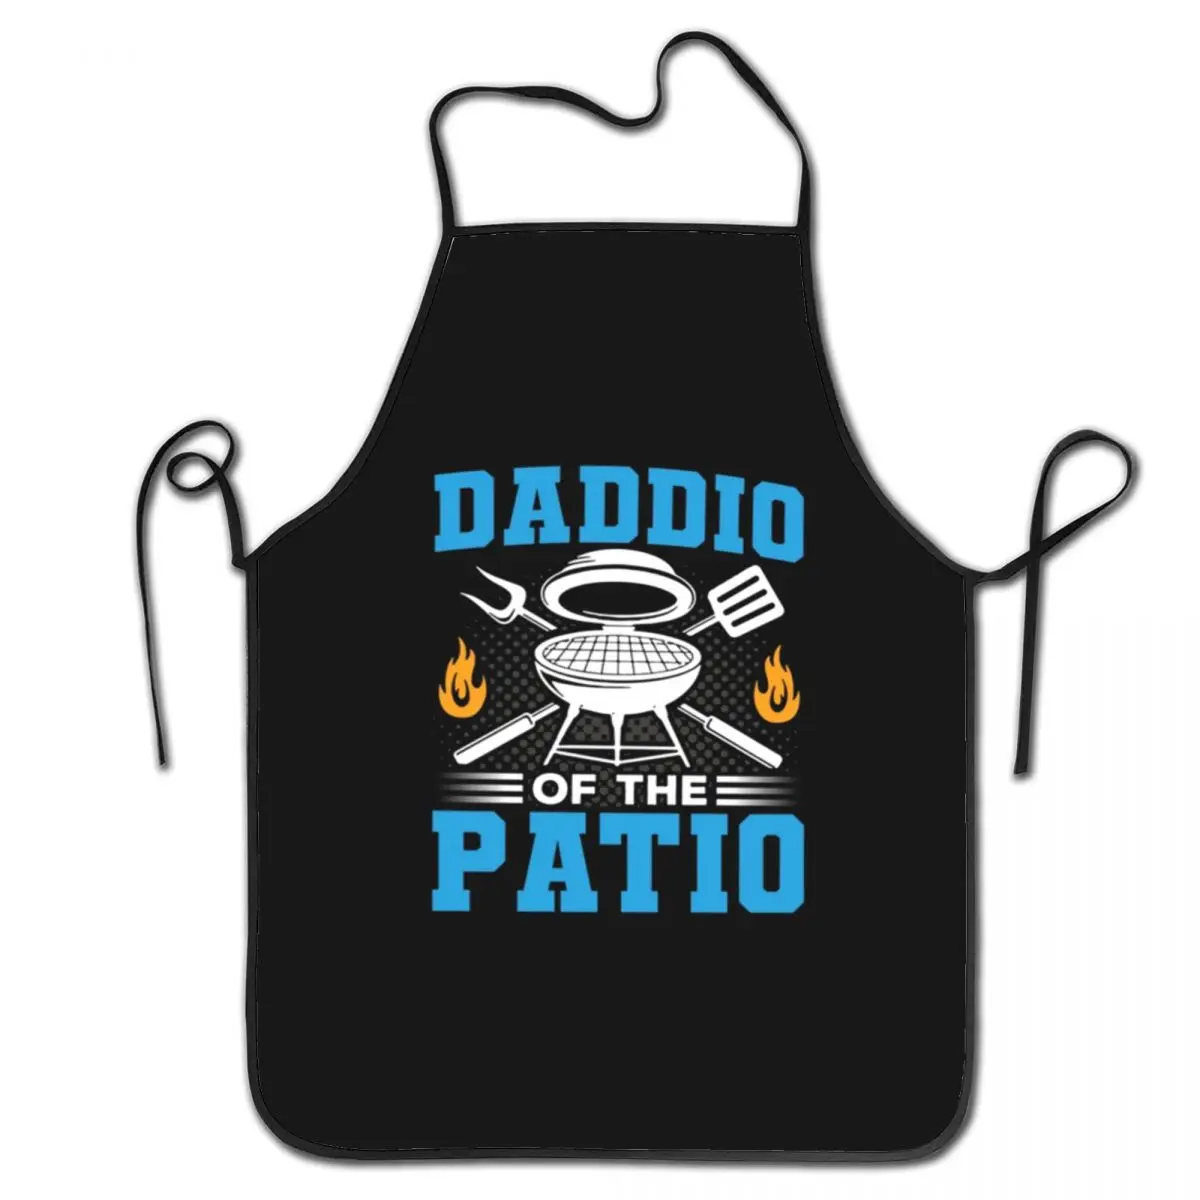 

Barbecue Daddio Of The Patio Apron Kitchen Chef Cooking Baking Bib Men Women BBQ Grilling Grill Tablier Cuisine for Painting